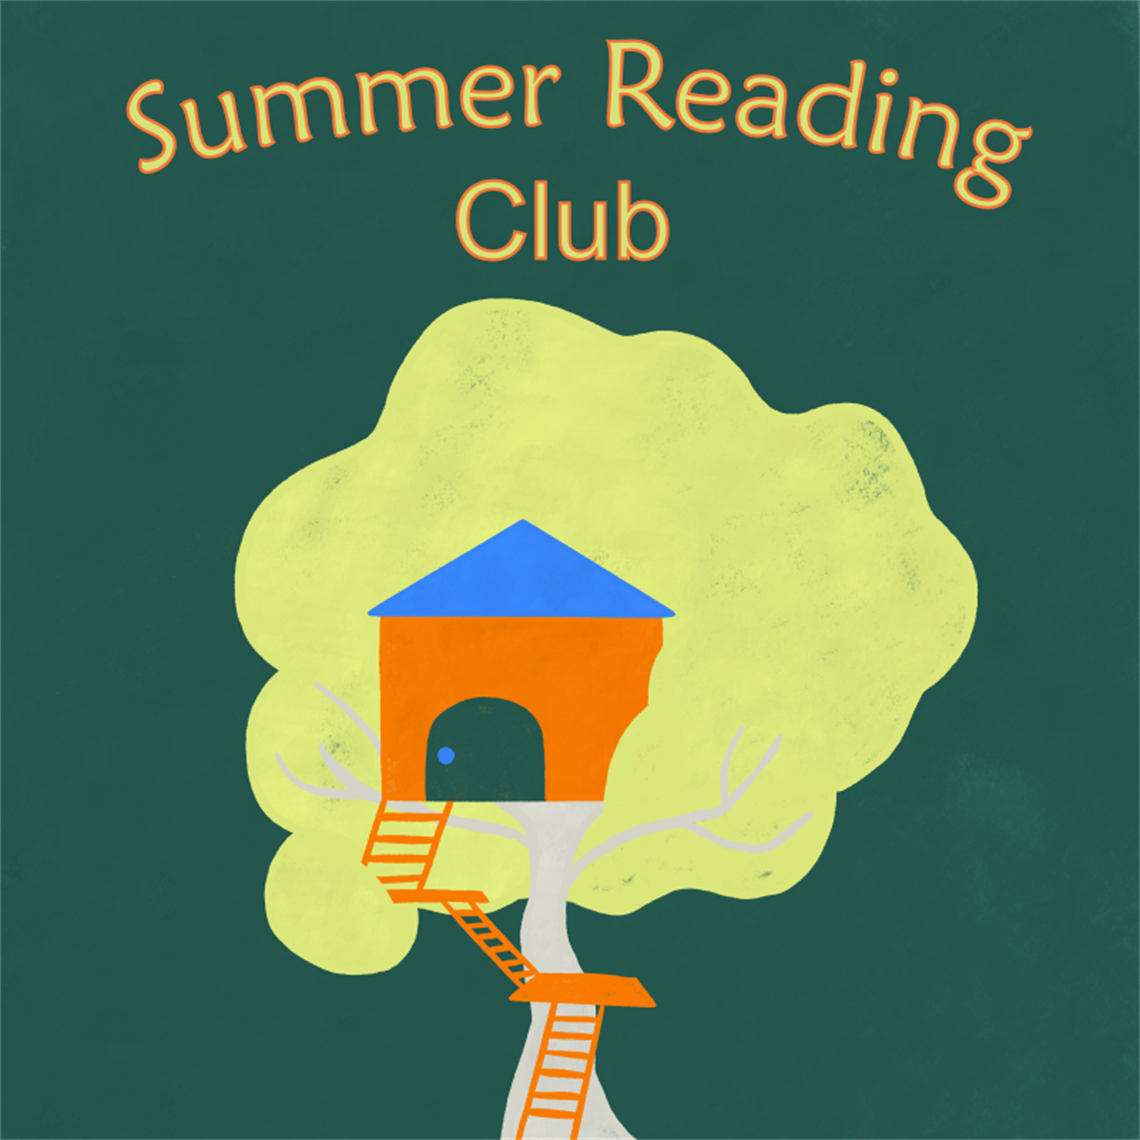 Summer Reading Club graphic of tree house